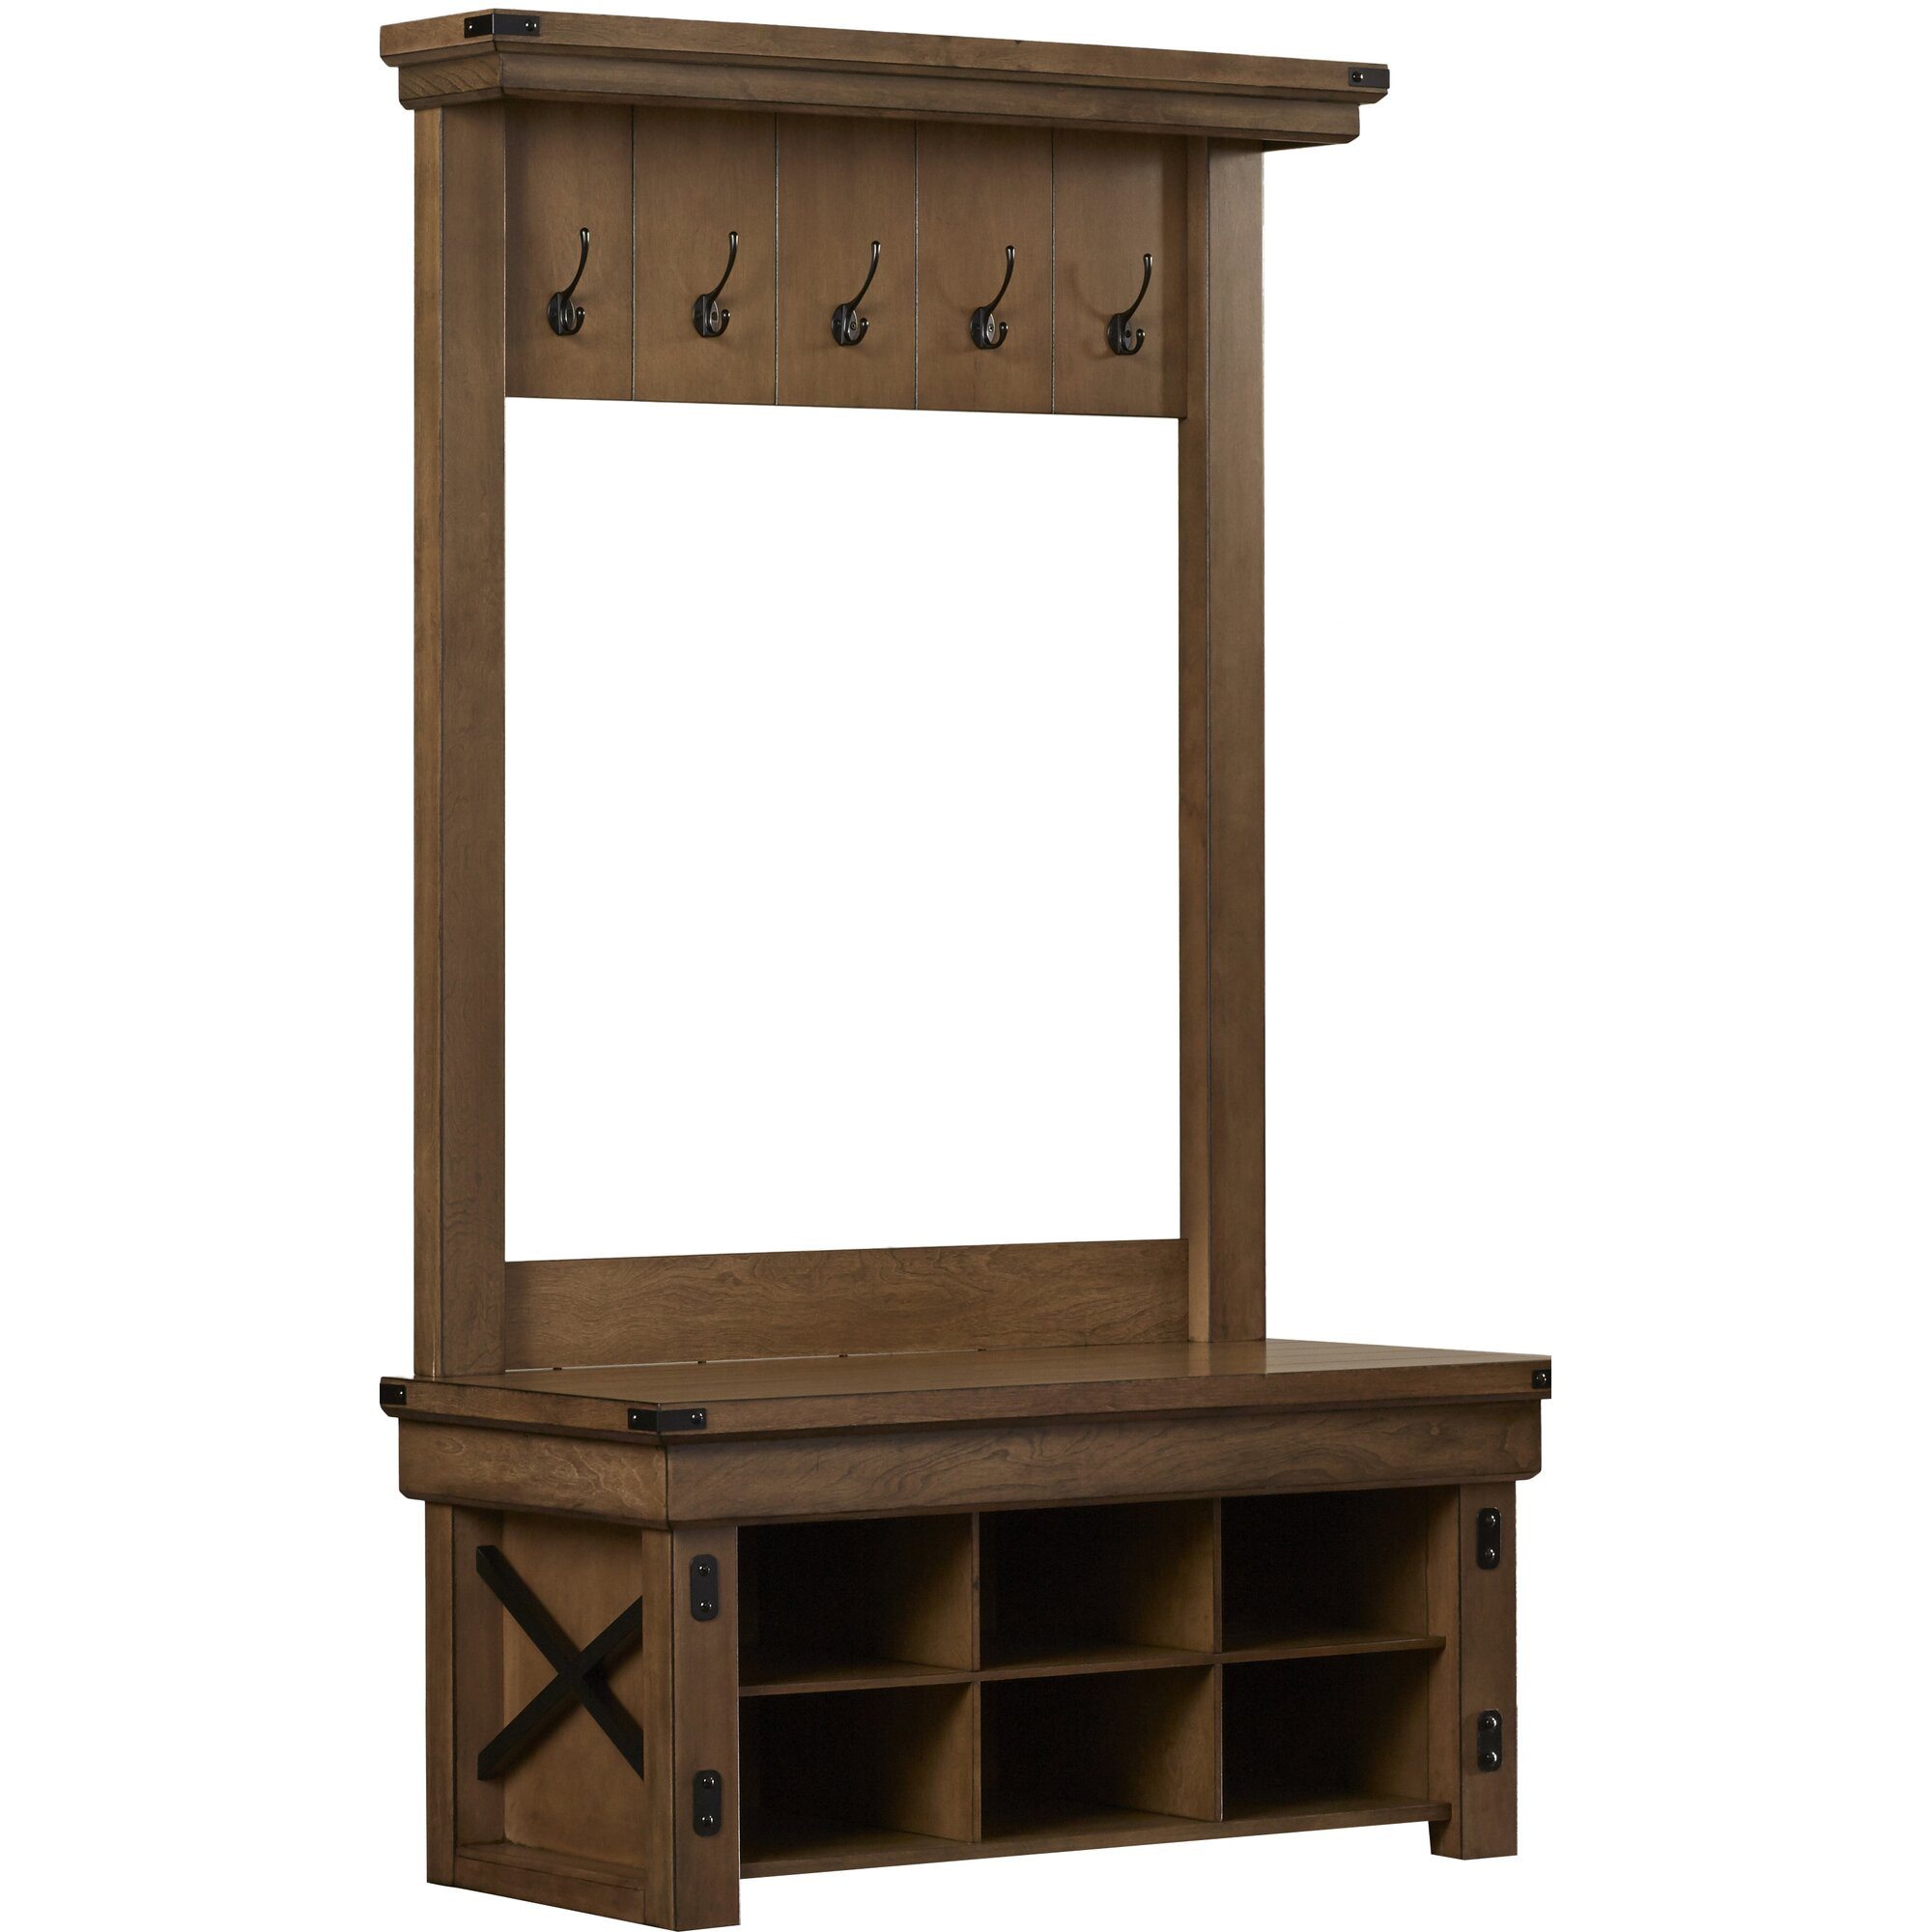 Entry Hall Tree Storage Bench
 August Grove Irwin Wood Veneer Entryway Hall Tree with